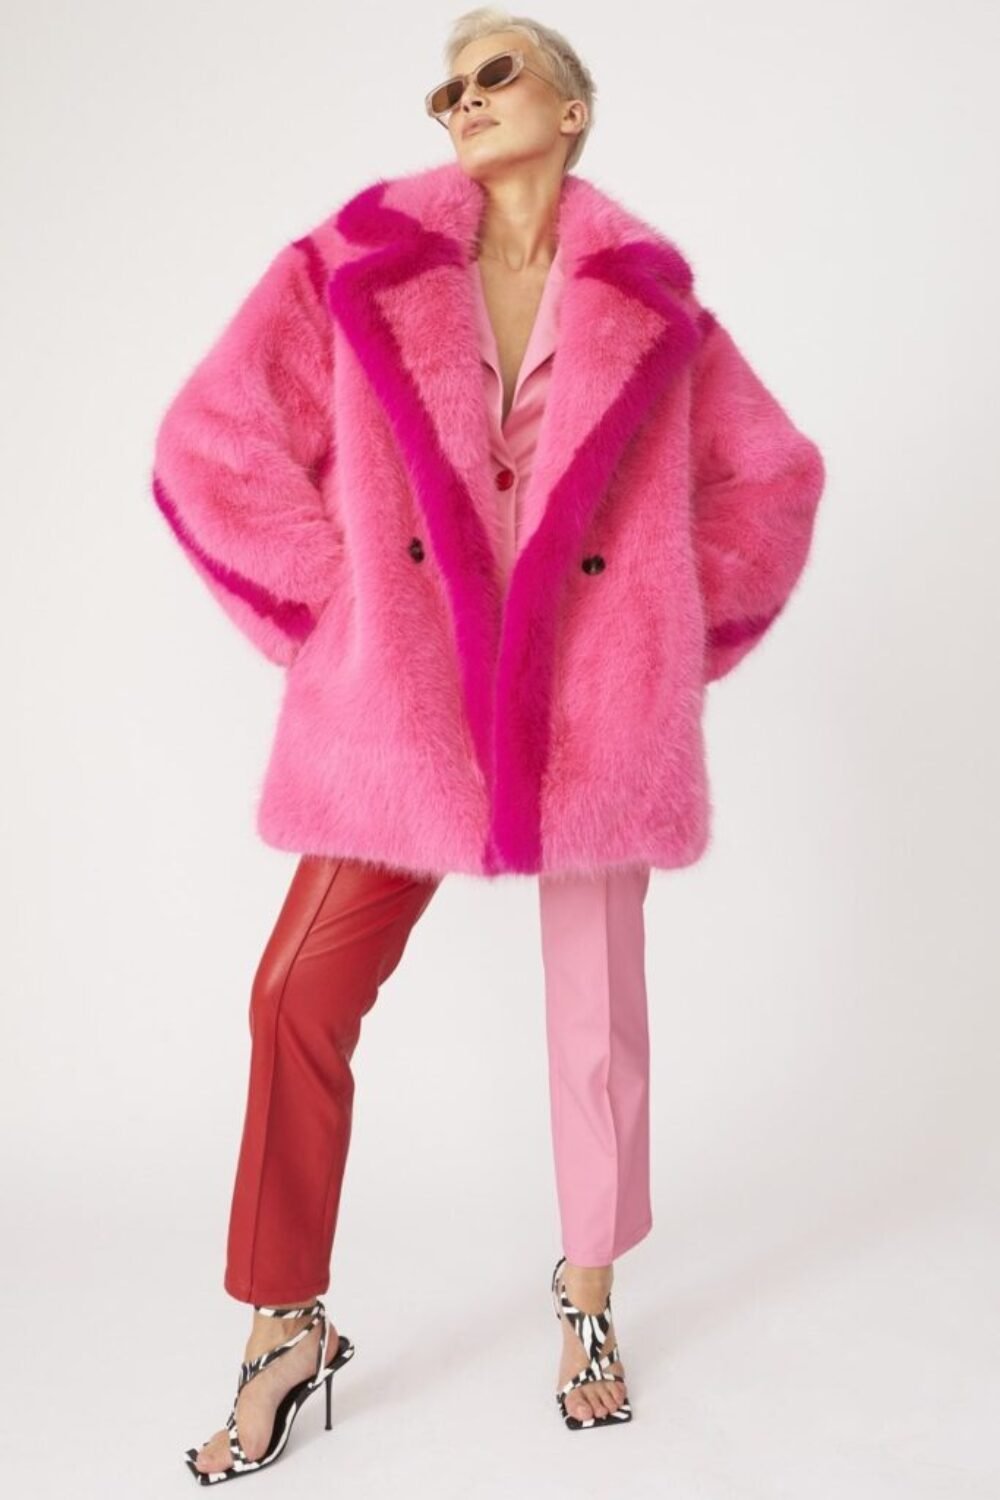 Shop Lux Pink Knitted Bamboo Contrast Midi Coat and women's luxury and designer clothes at www.lux-apparel.co.uk